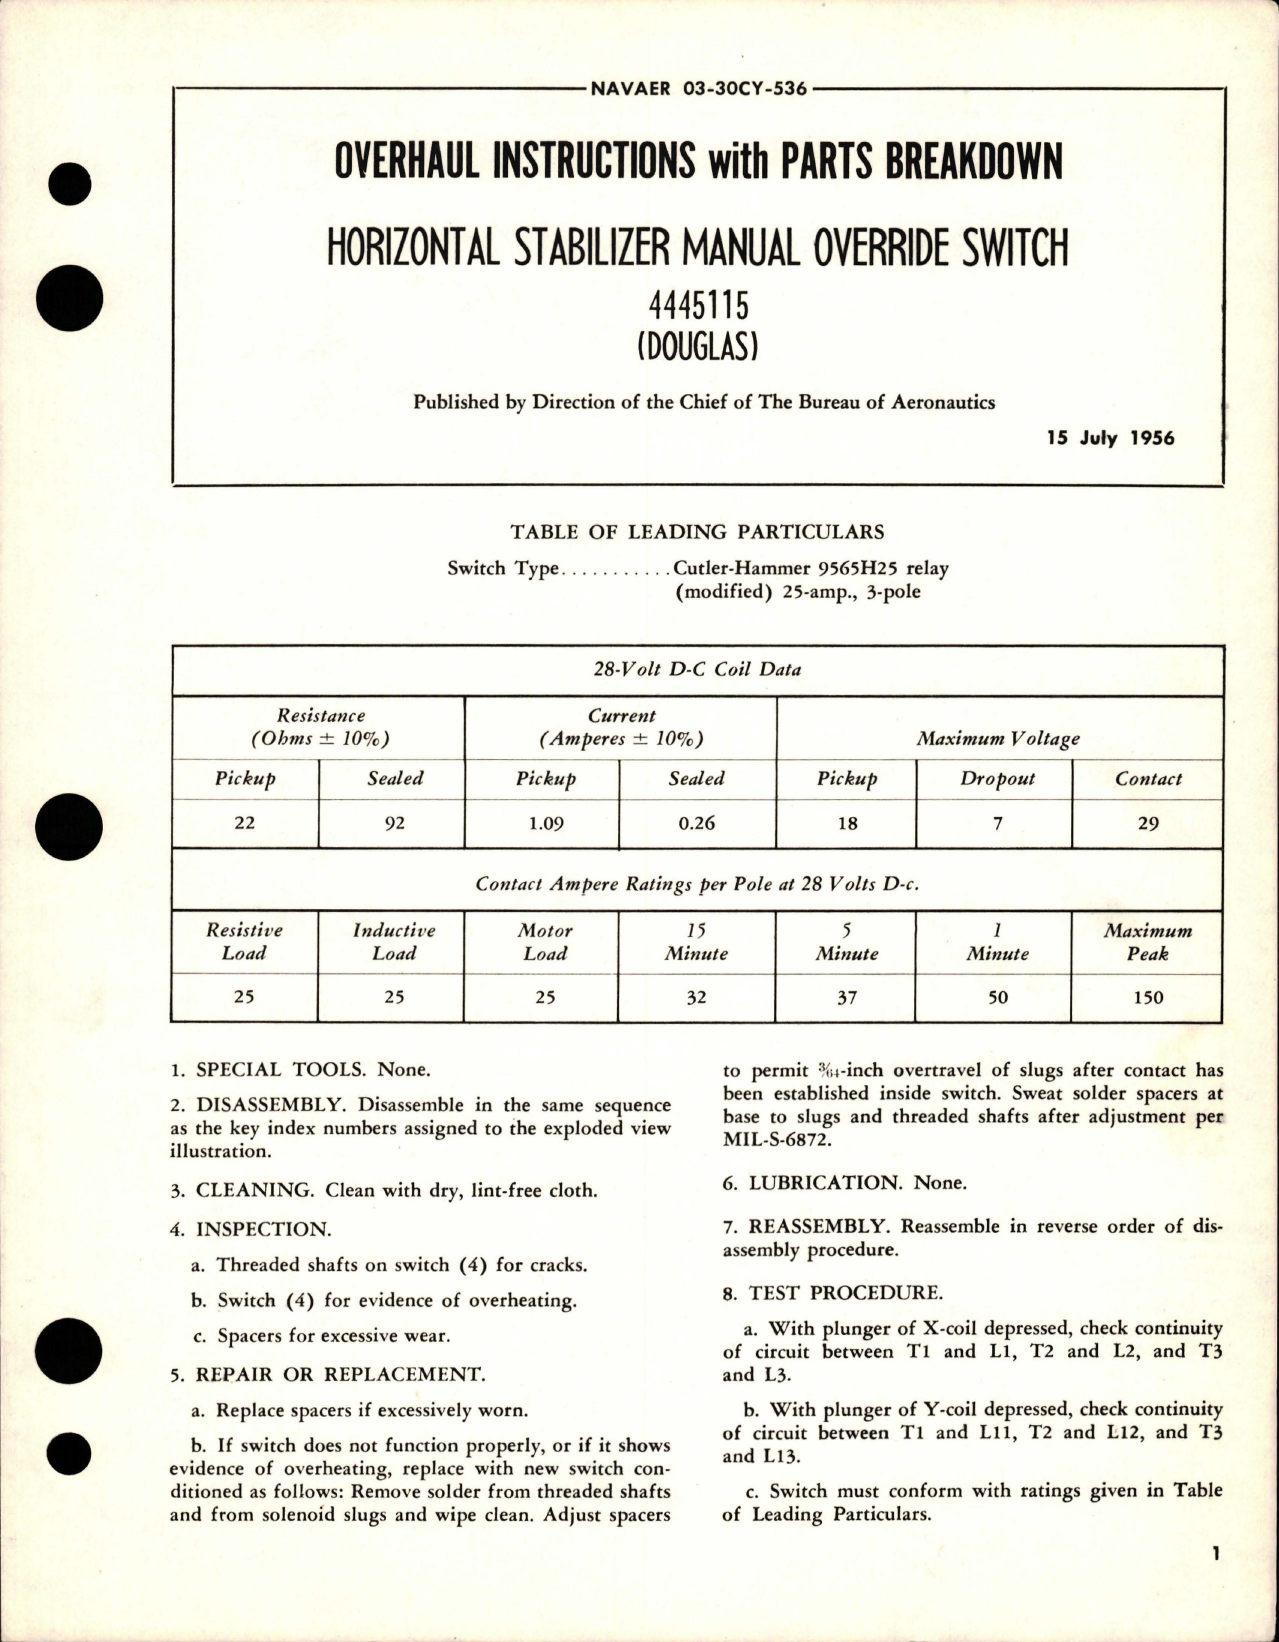 Sample page 1 from AirCorps Library document: Overhaul Instructions with Parts for Horizontal Stabilizer Manual Override Switch - 4445115